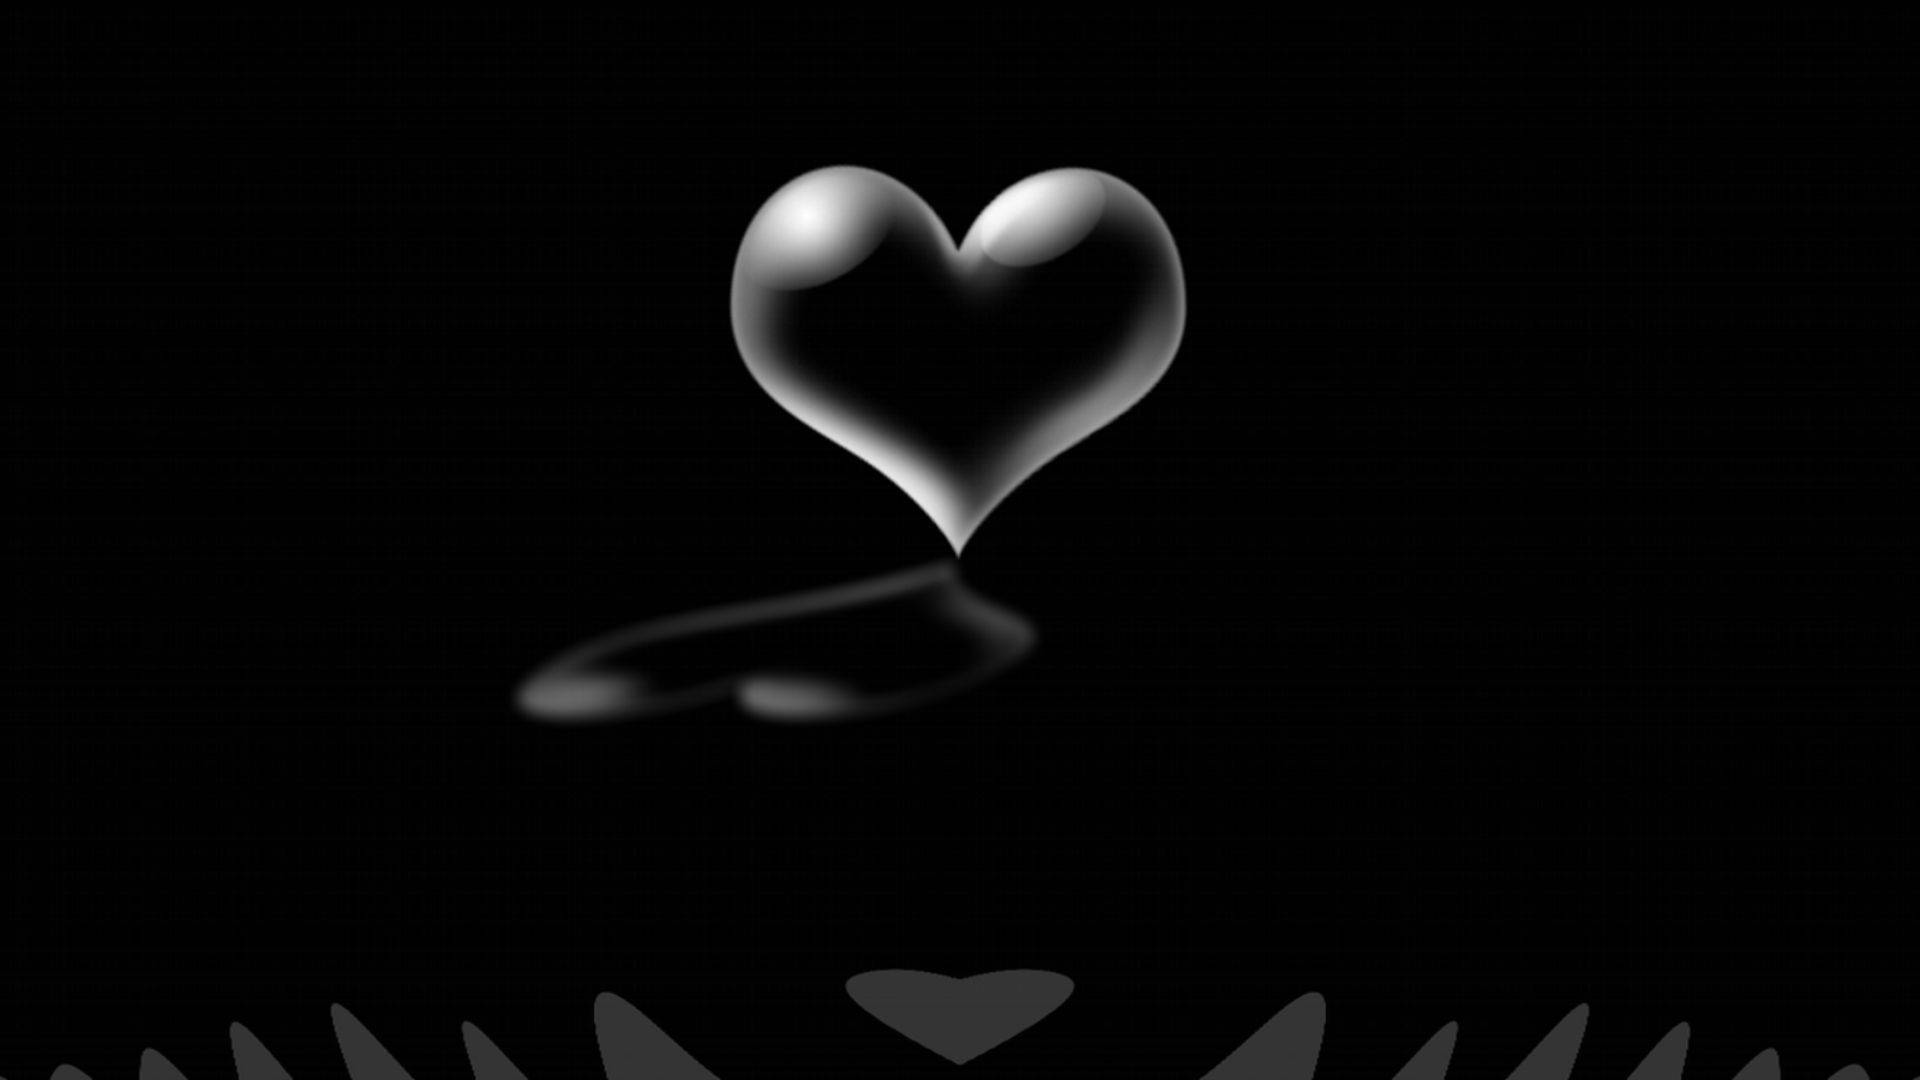 Black Heart With A Reflection Wallpaper